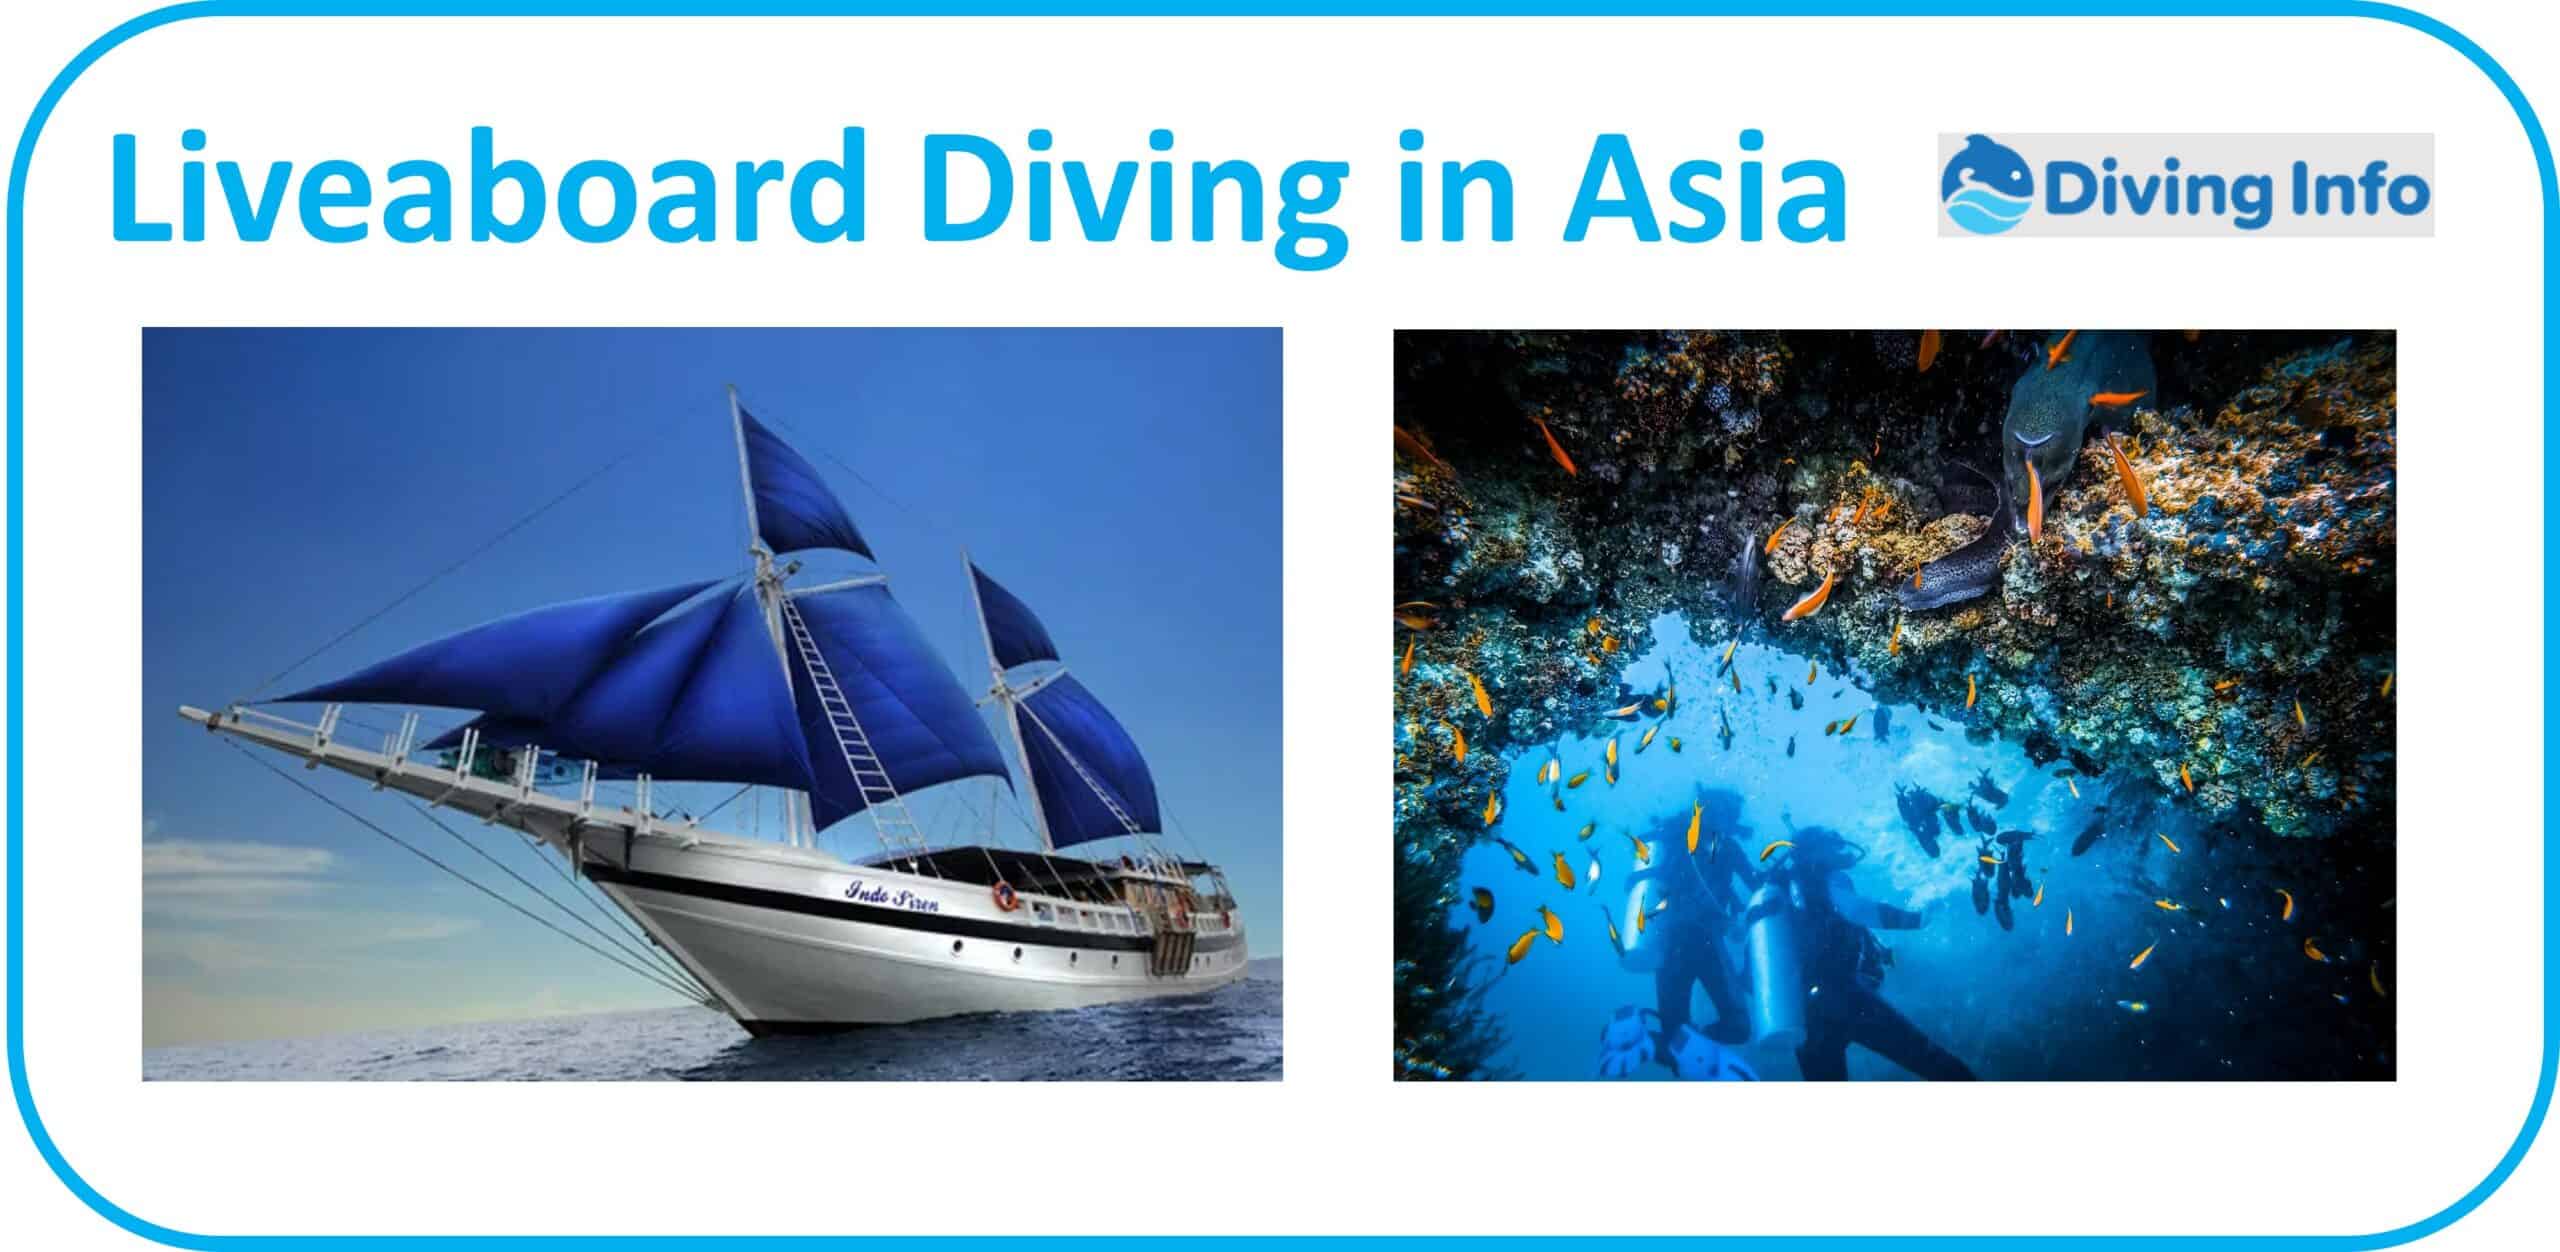 Liveaboard Diving in Asia